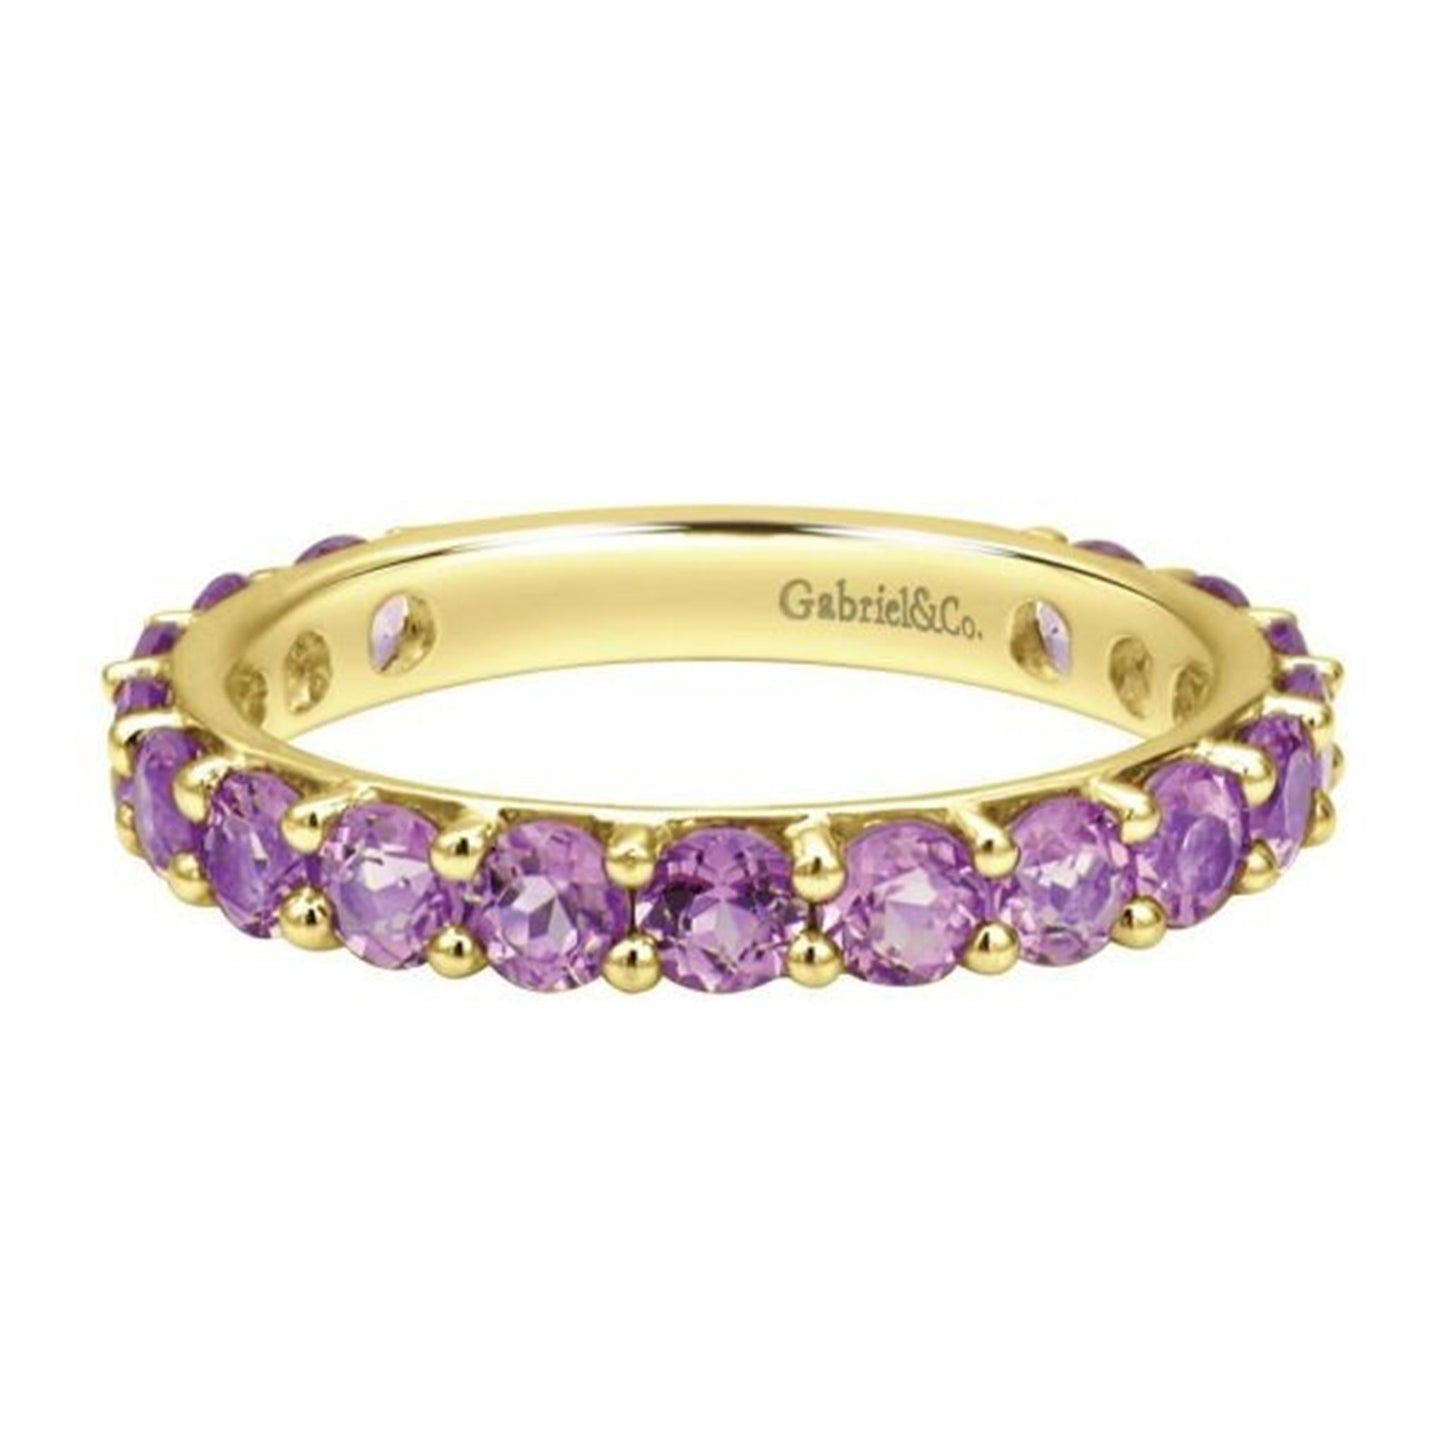 Gabriel & Co. Gold & Amethyst Stackable Ring